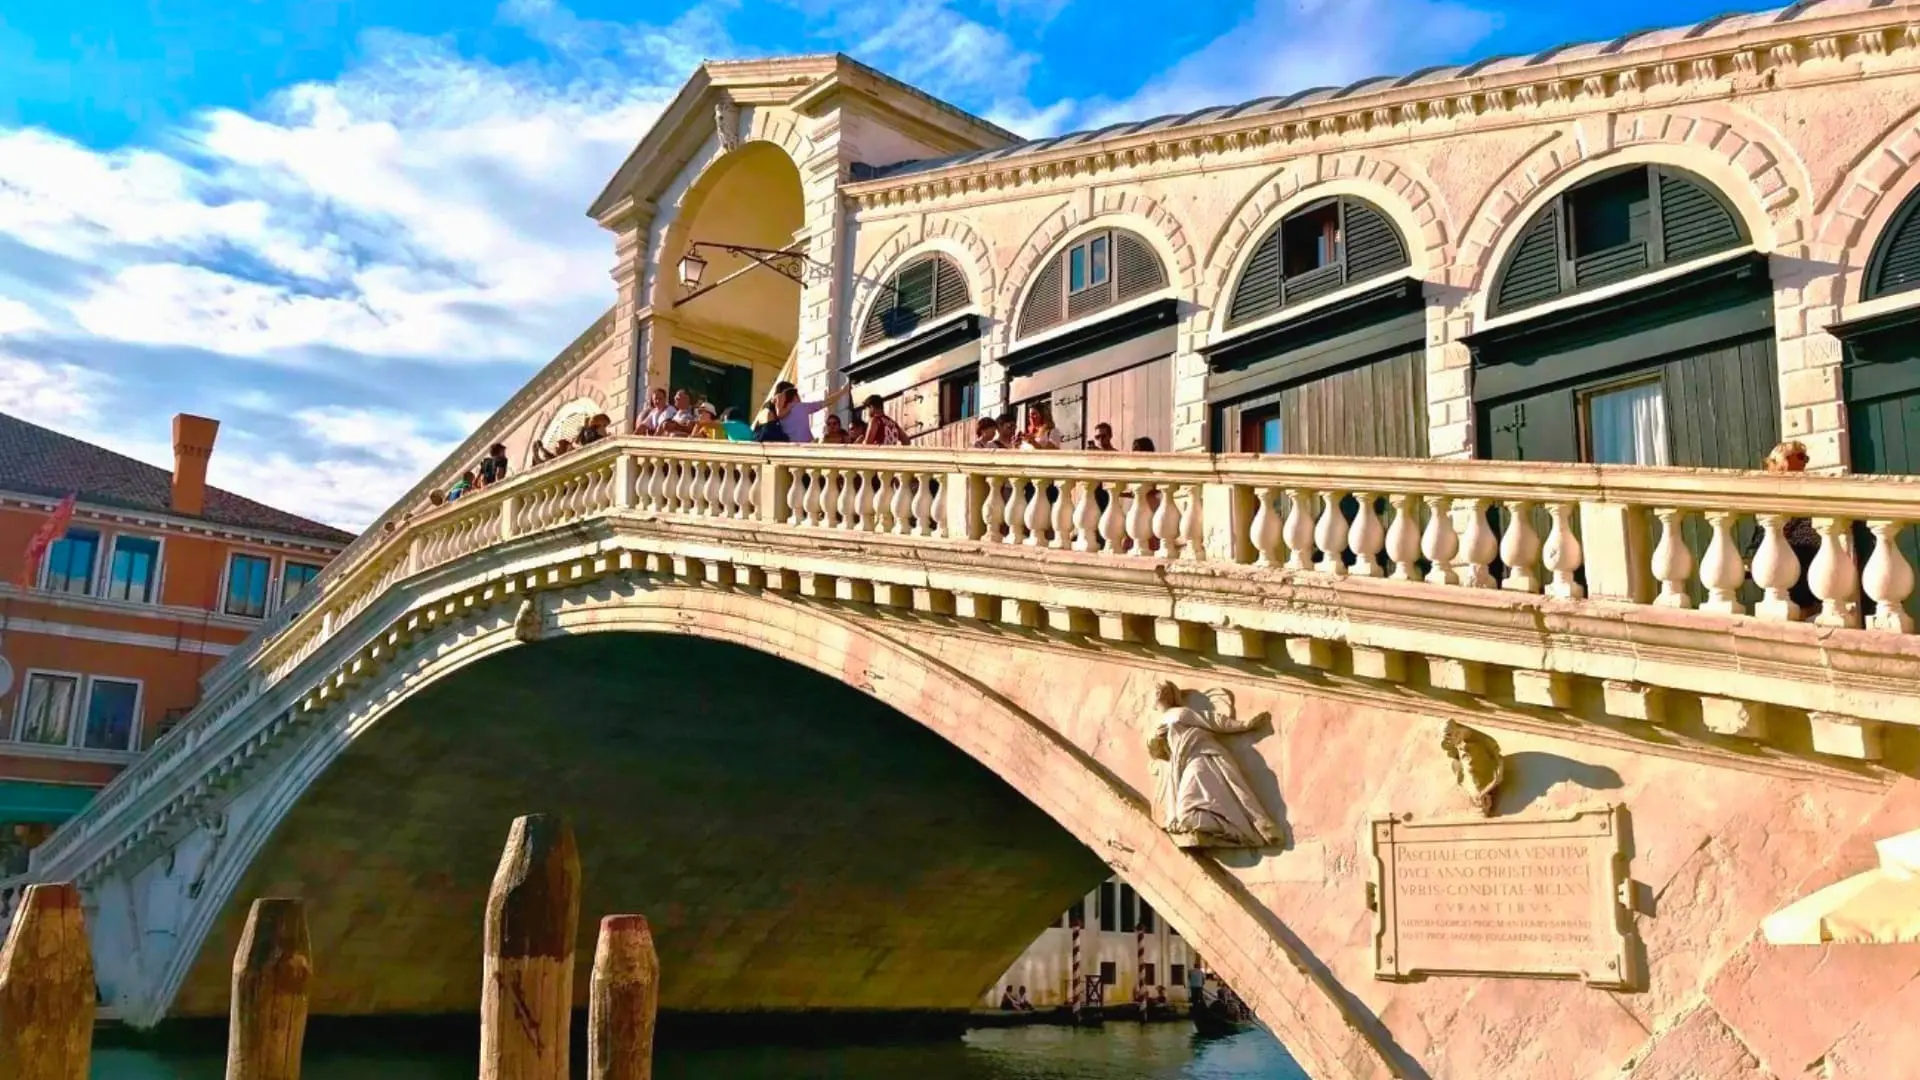 The Very Heart of Venice Walking Tour: from St Mark's Square to Rialto Bridge